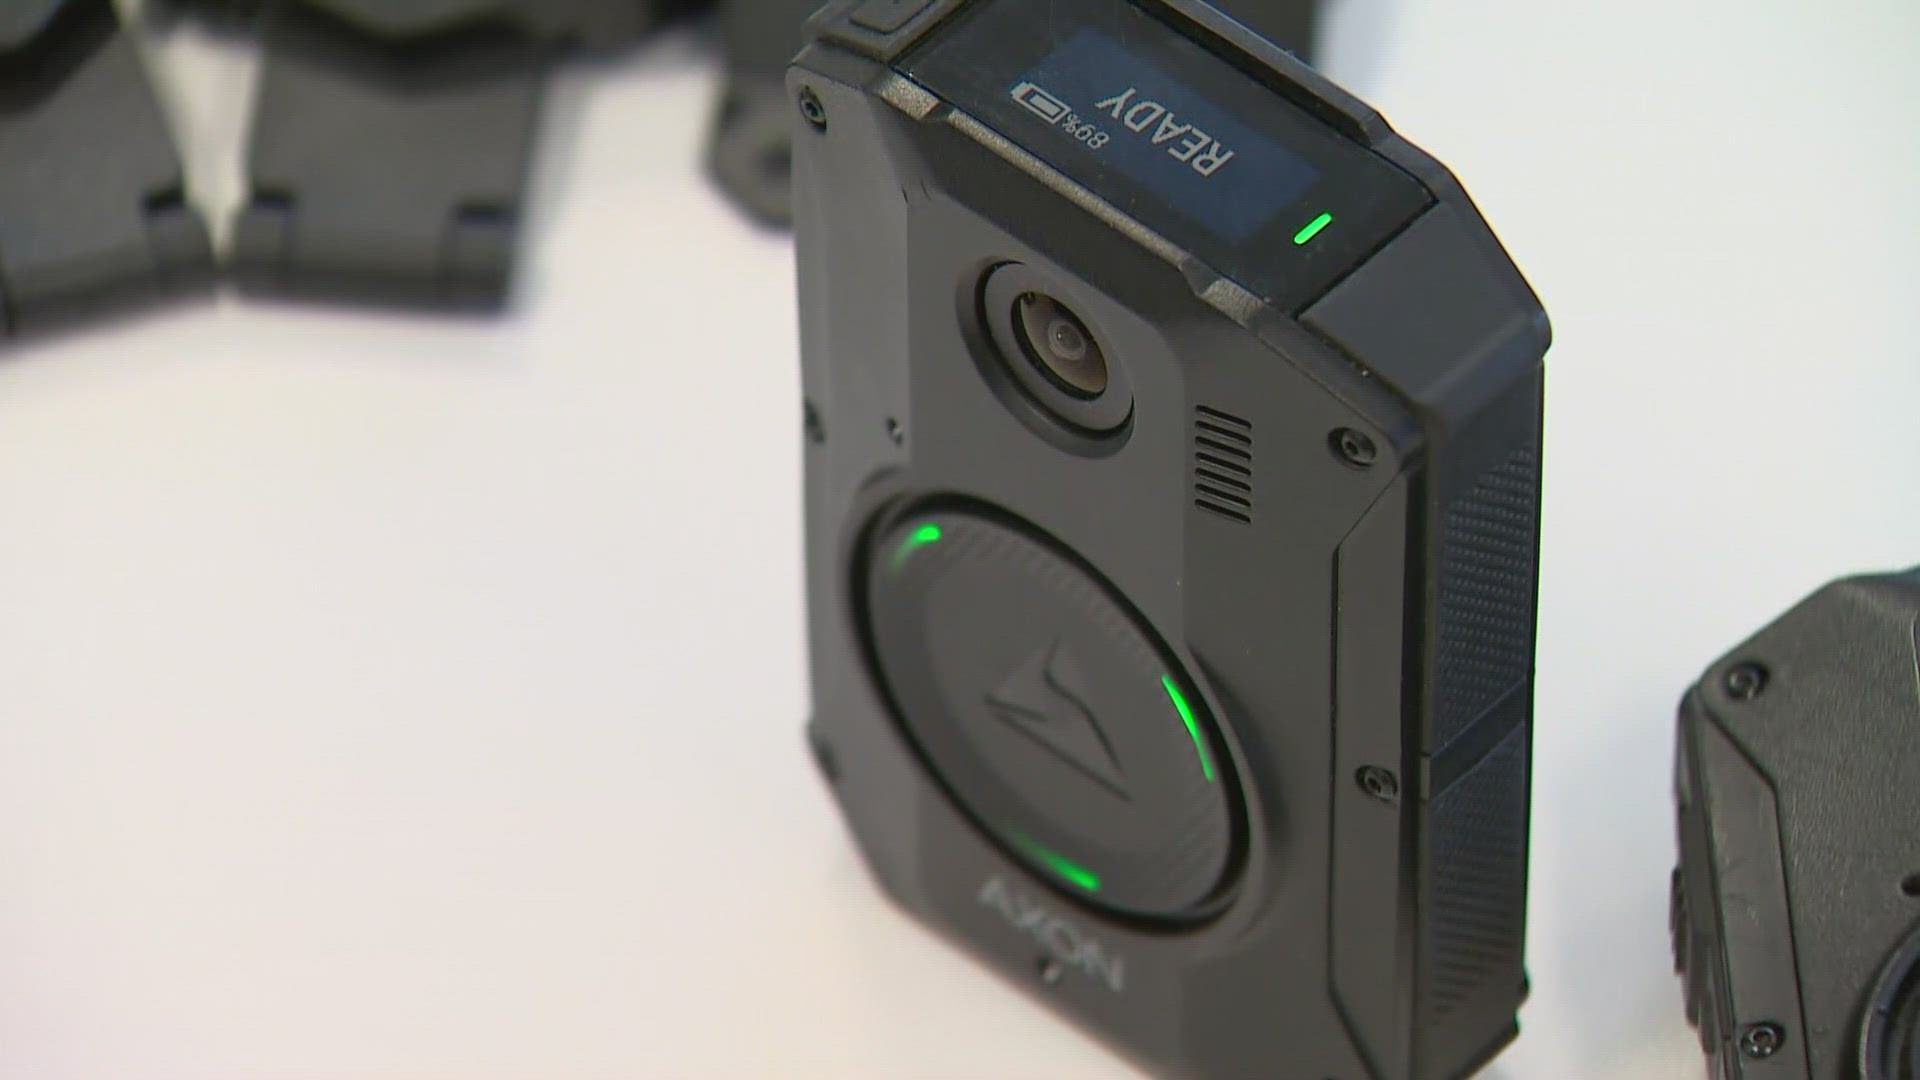 King County authorities and U.S. Rep. Kim Schrier announced Wednesday funding for body cameras in the eighth congressional district and the county sheriff's office.